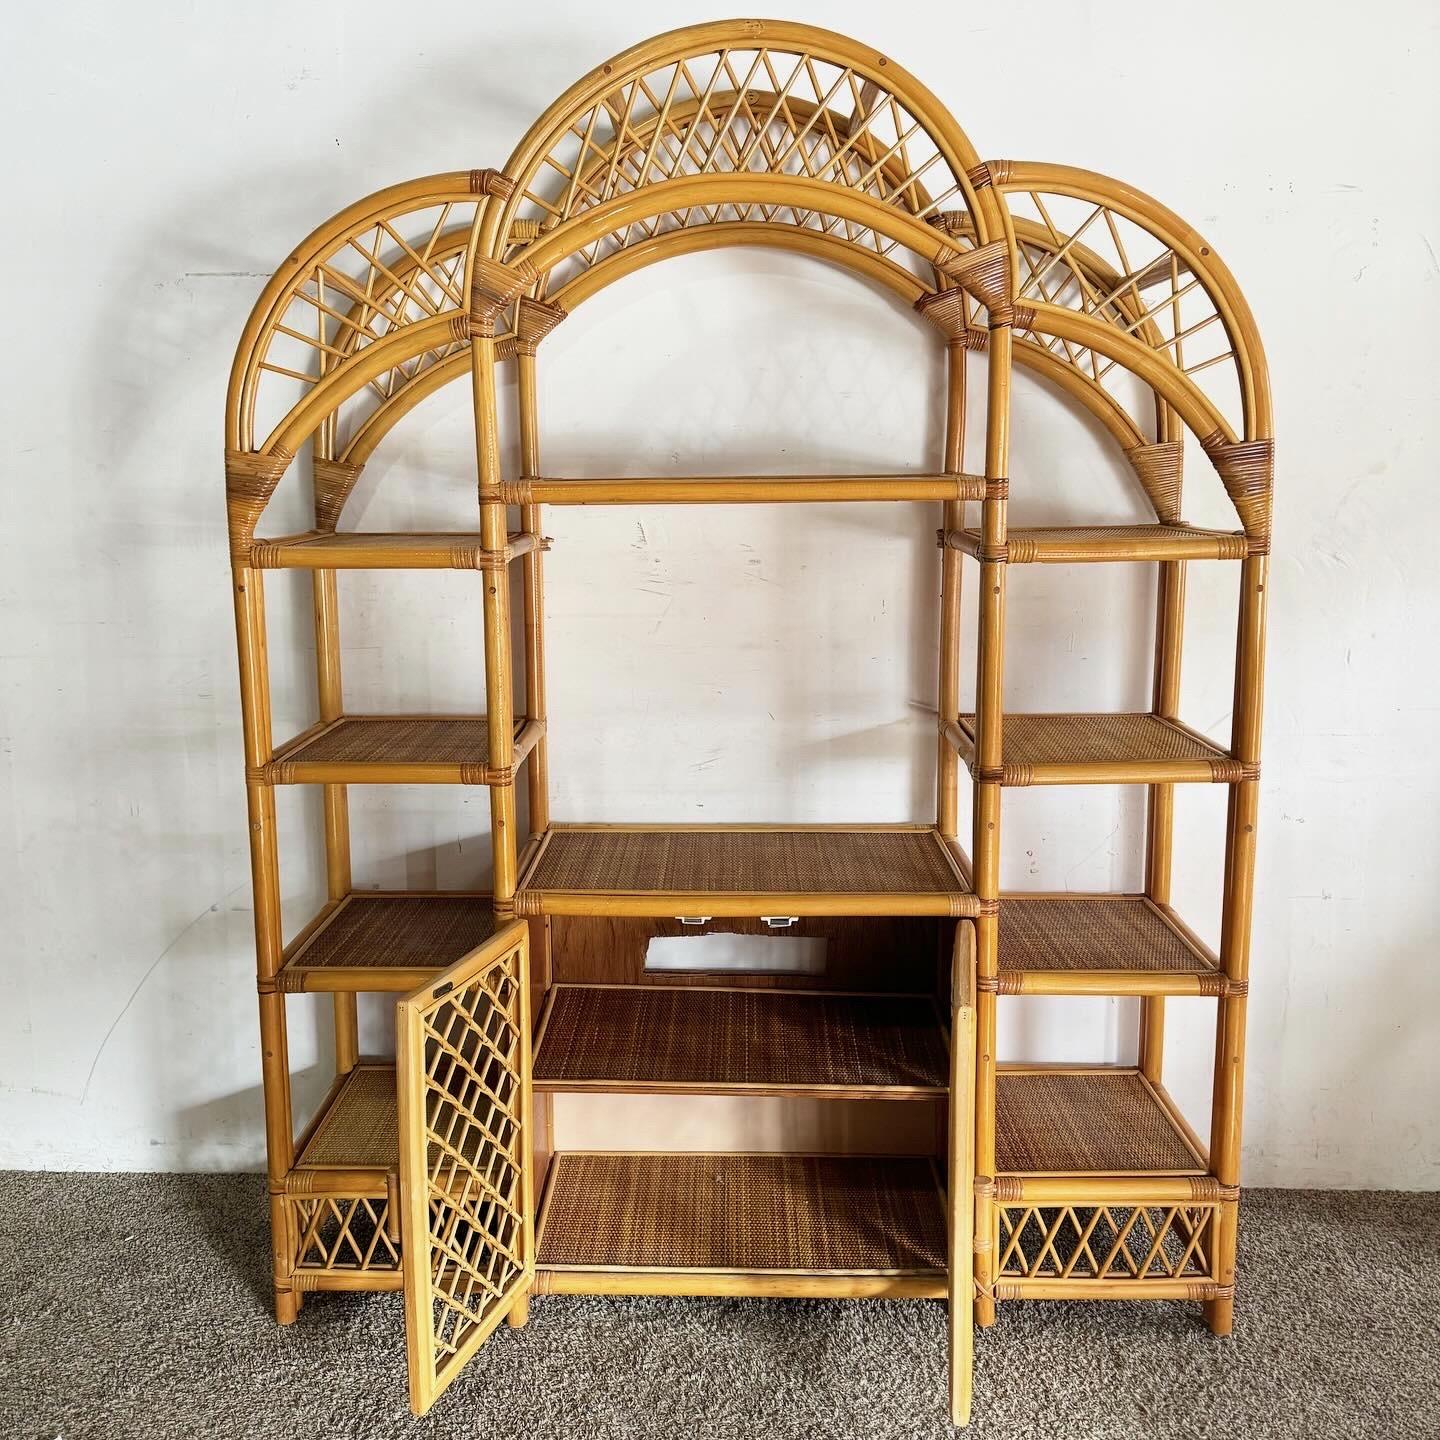 20th Century Boho Chic Arched Bamboo Rattan and Wicker Etagere For Sale